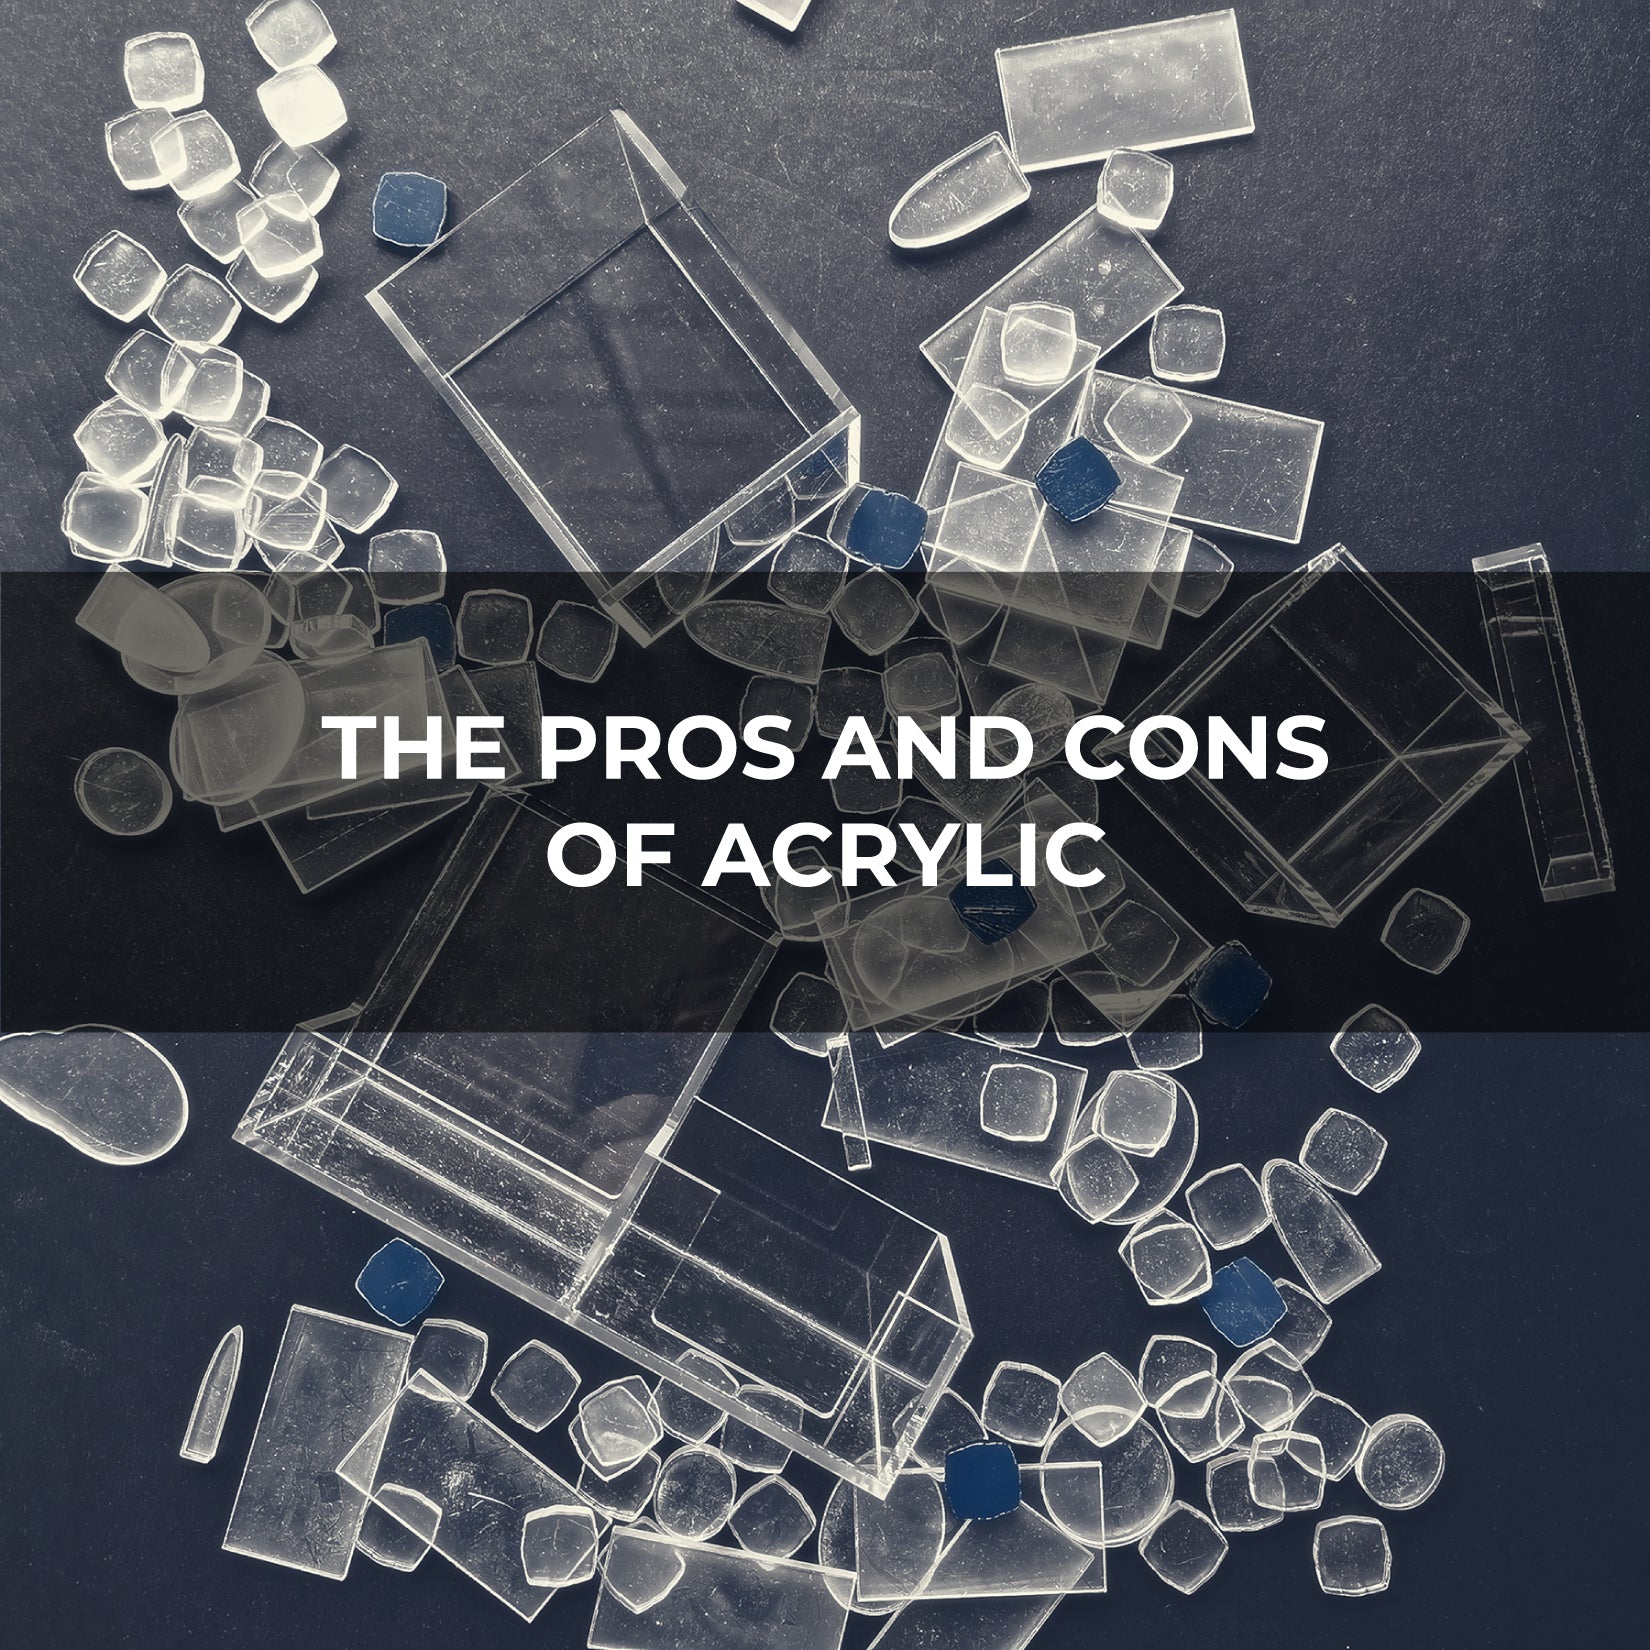 The Pros and Cons of Acrylic